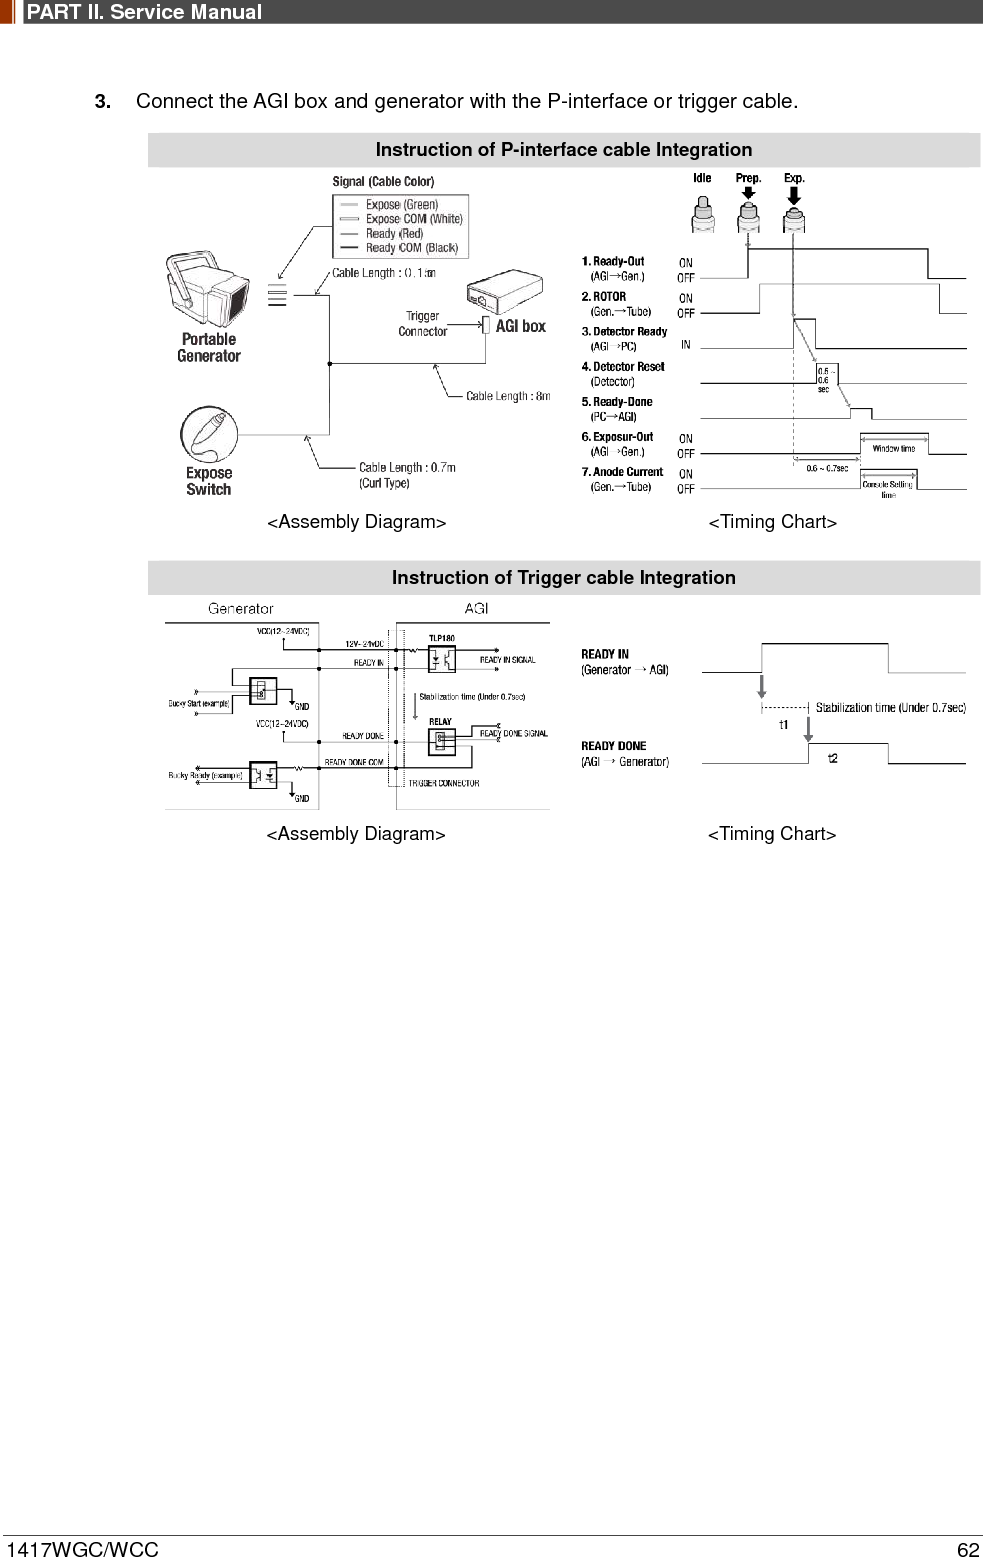 PART II. Service Manual  1417WGC/WCC 62 3. Connect the AGI box and generator with the P-interface or trigger cable. Instruction of P-interface cable Integration   &lt;Assembly Diagram&gt; &lt;Timing Chart&gt;  Instruction of Trigger cable Integration   &lt;Assembly Diagram&gt; &lt;Timing Chart&gt;     